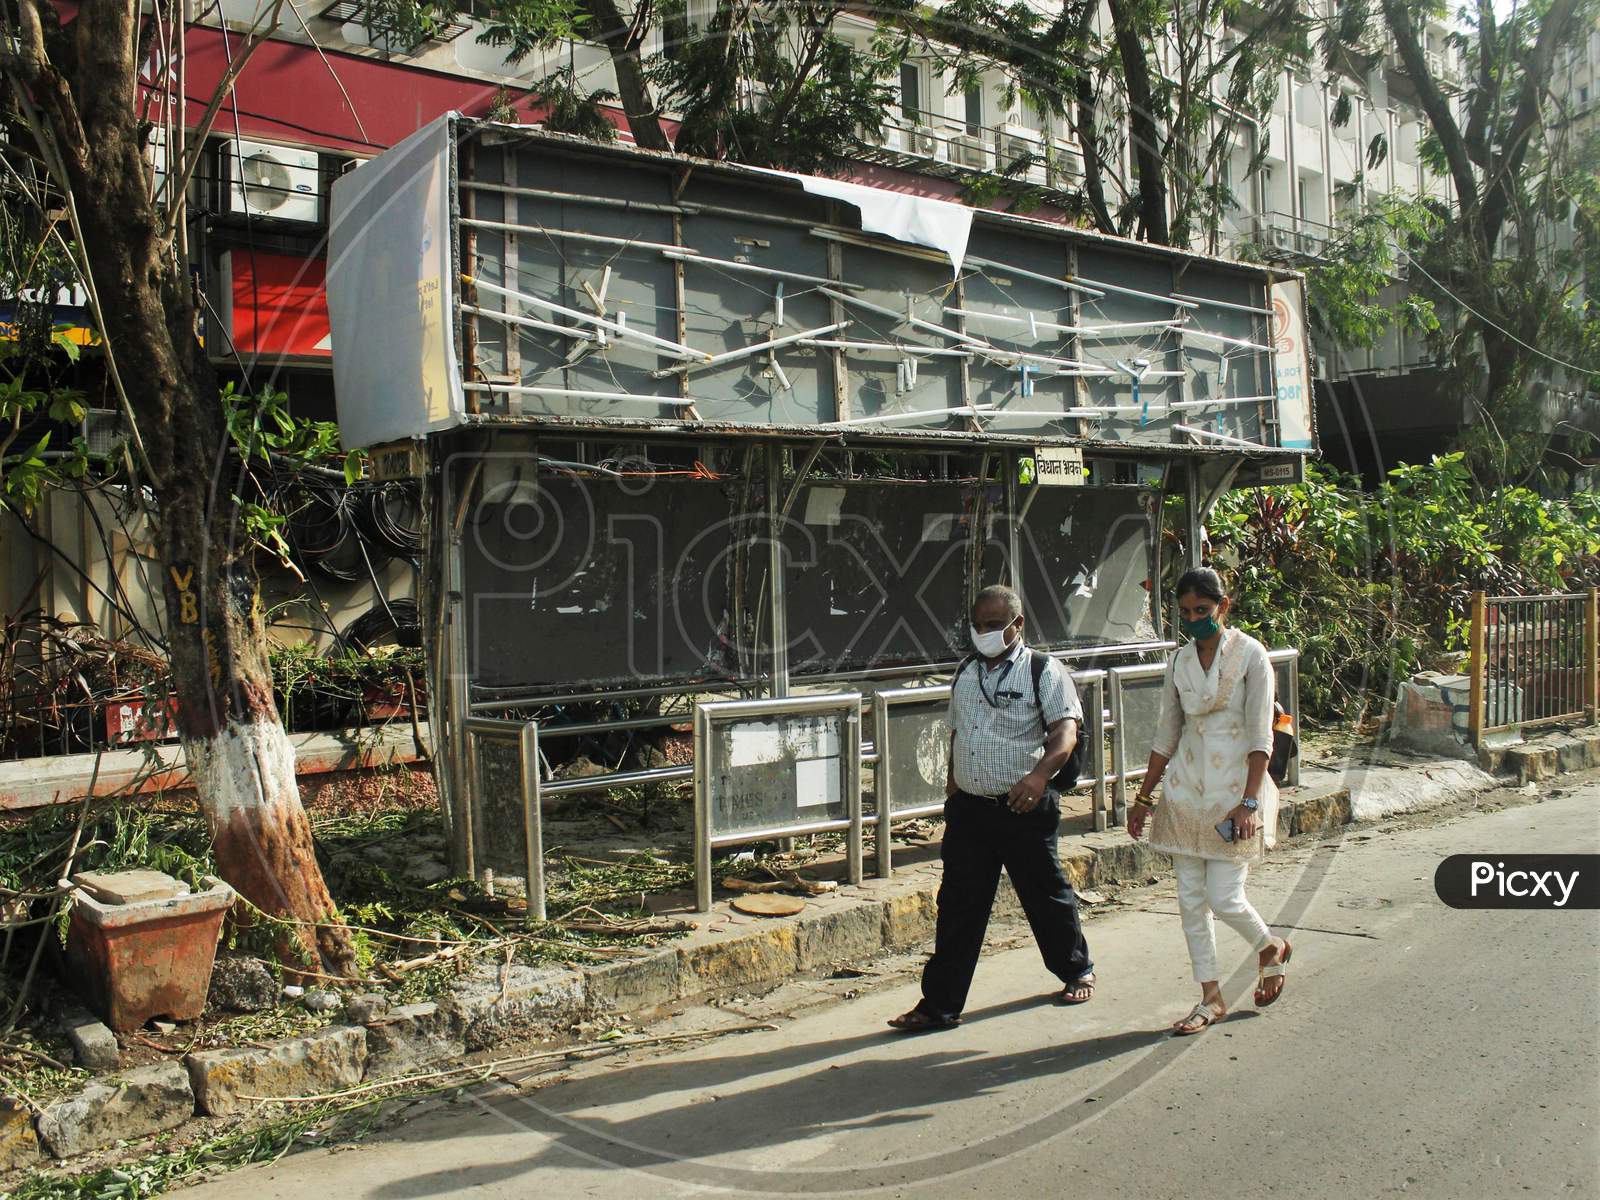 People walk past a damaged bus stop, after cyclone Nisarga made its landfall on June 3, on the outskirts of the city, in Mumbai, India, June 5, 2020.